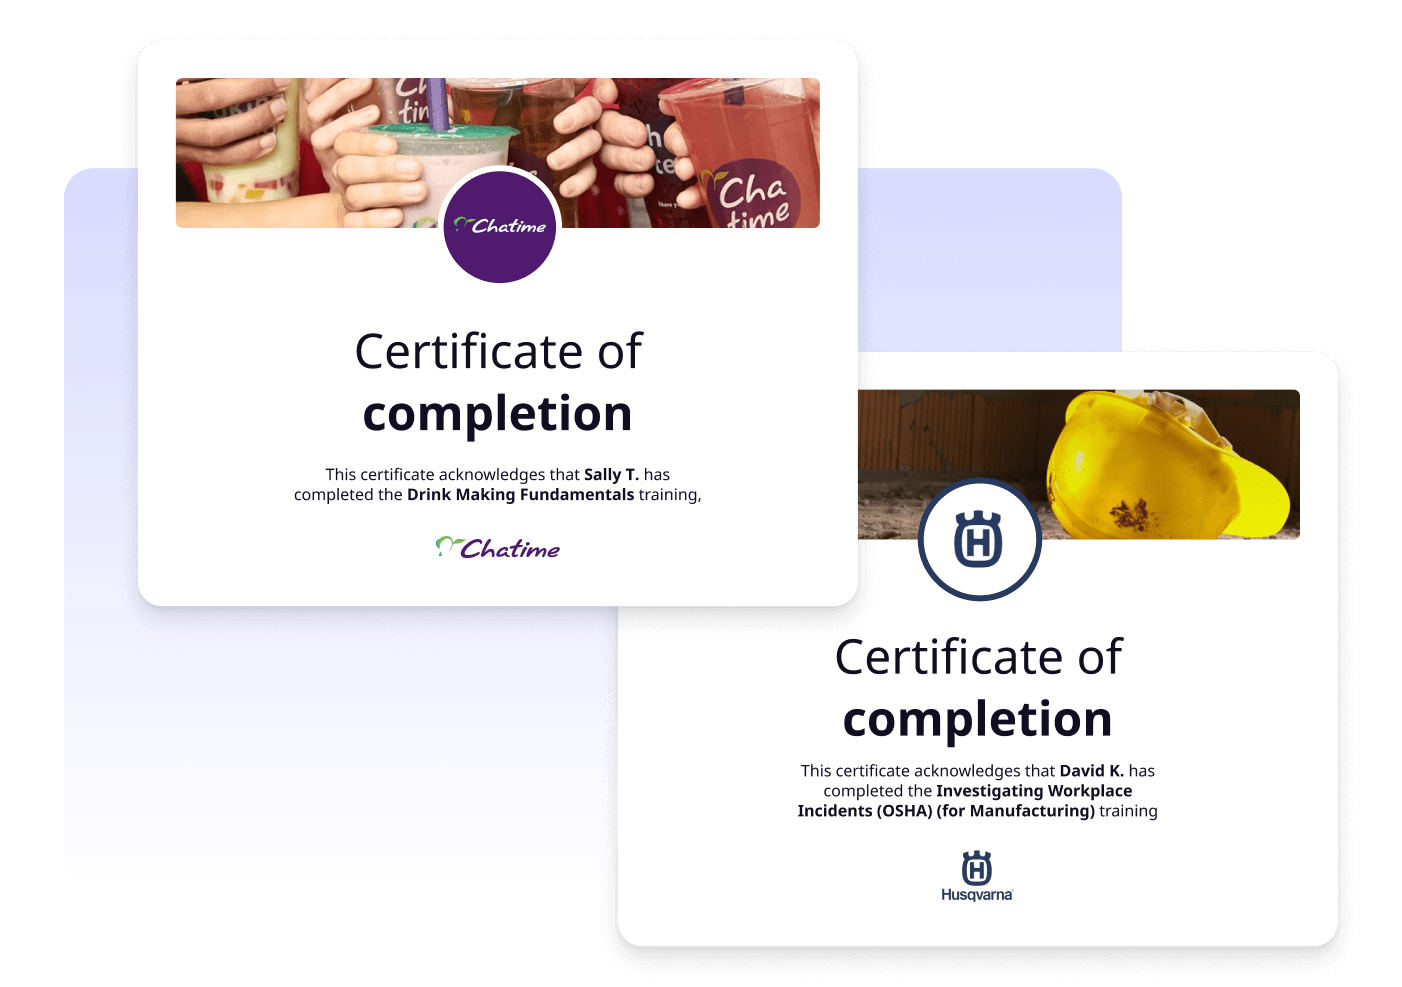 Be compliant by default, certify your team